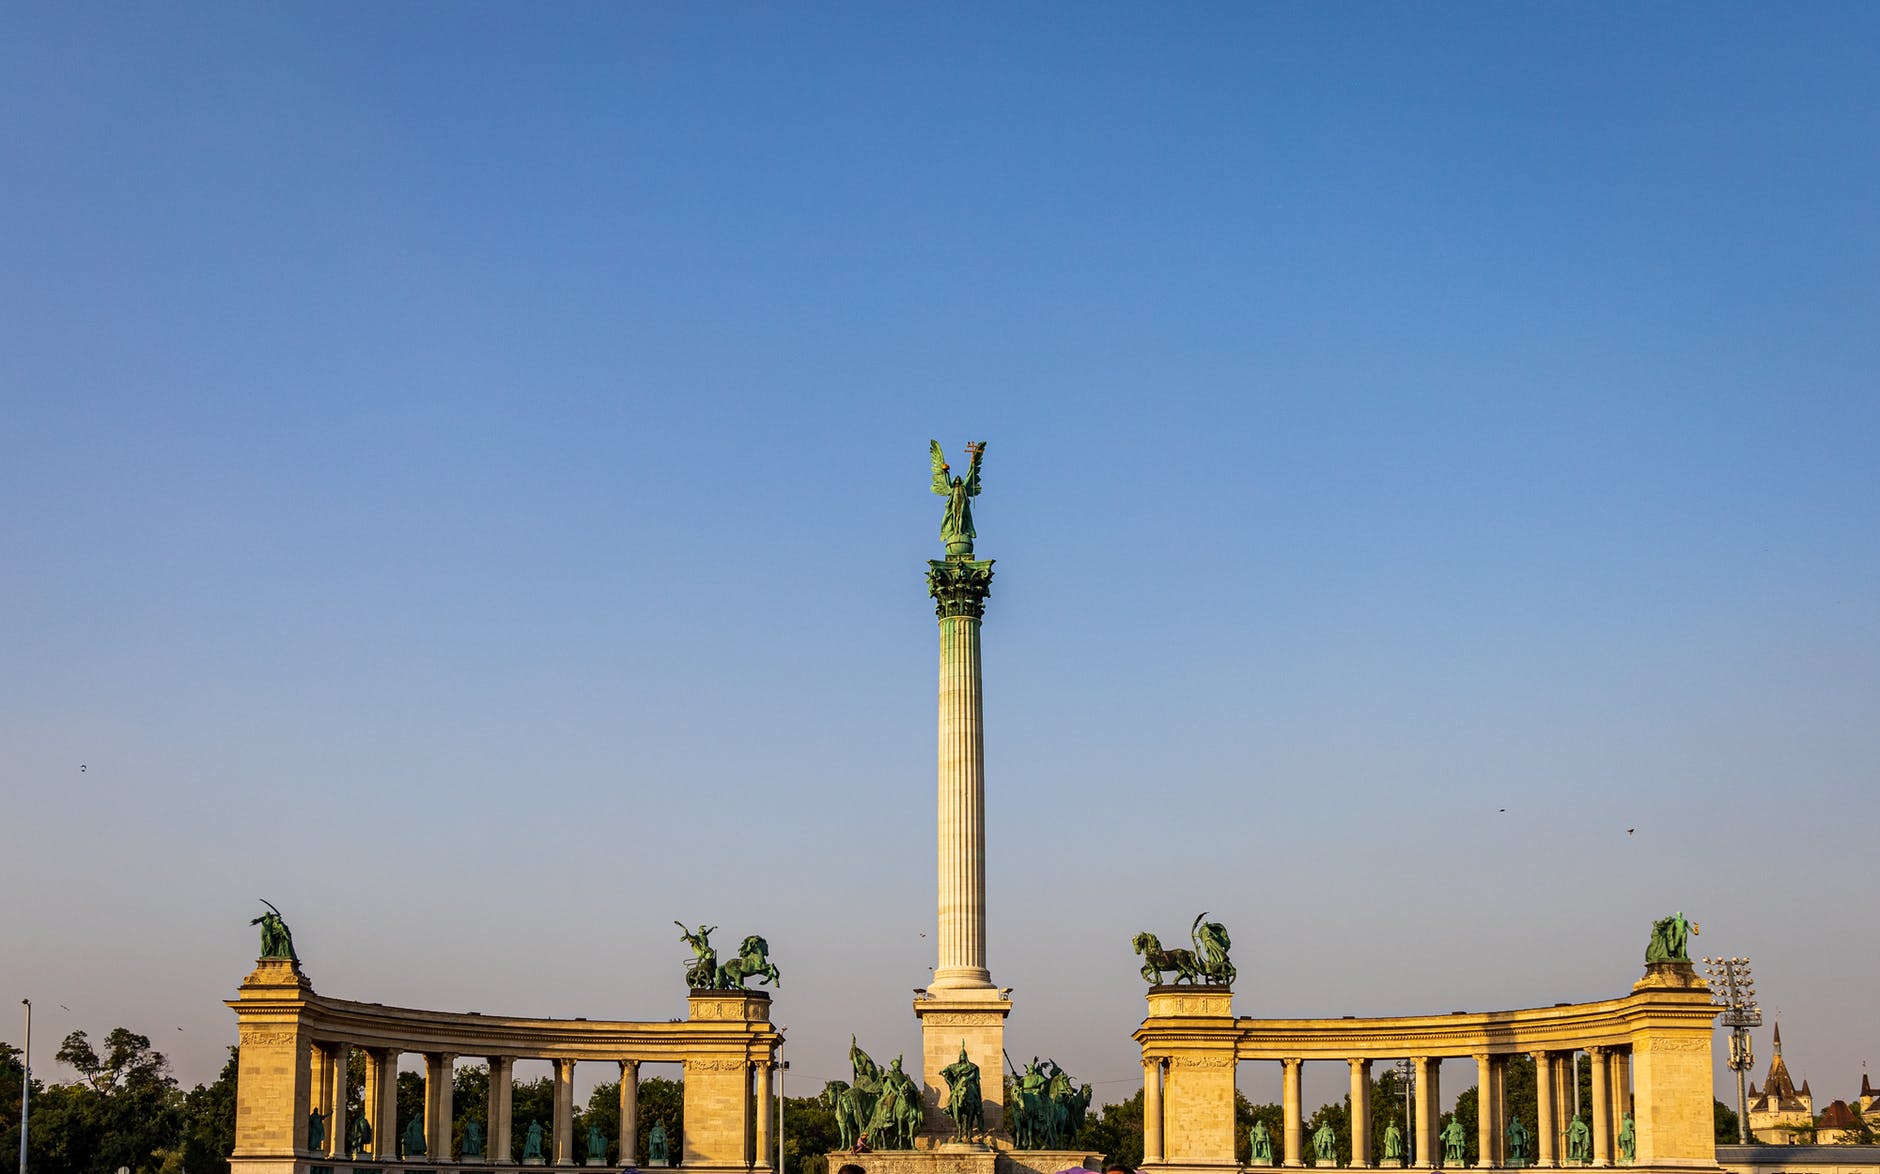 old column with statue in middle of square